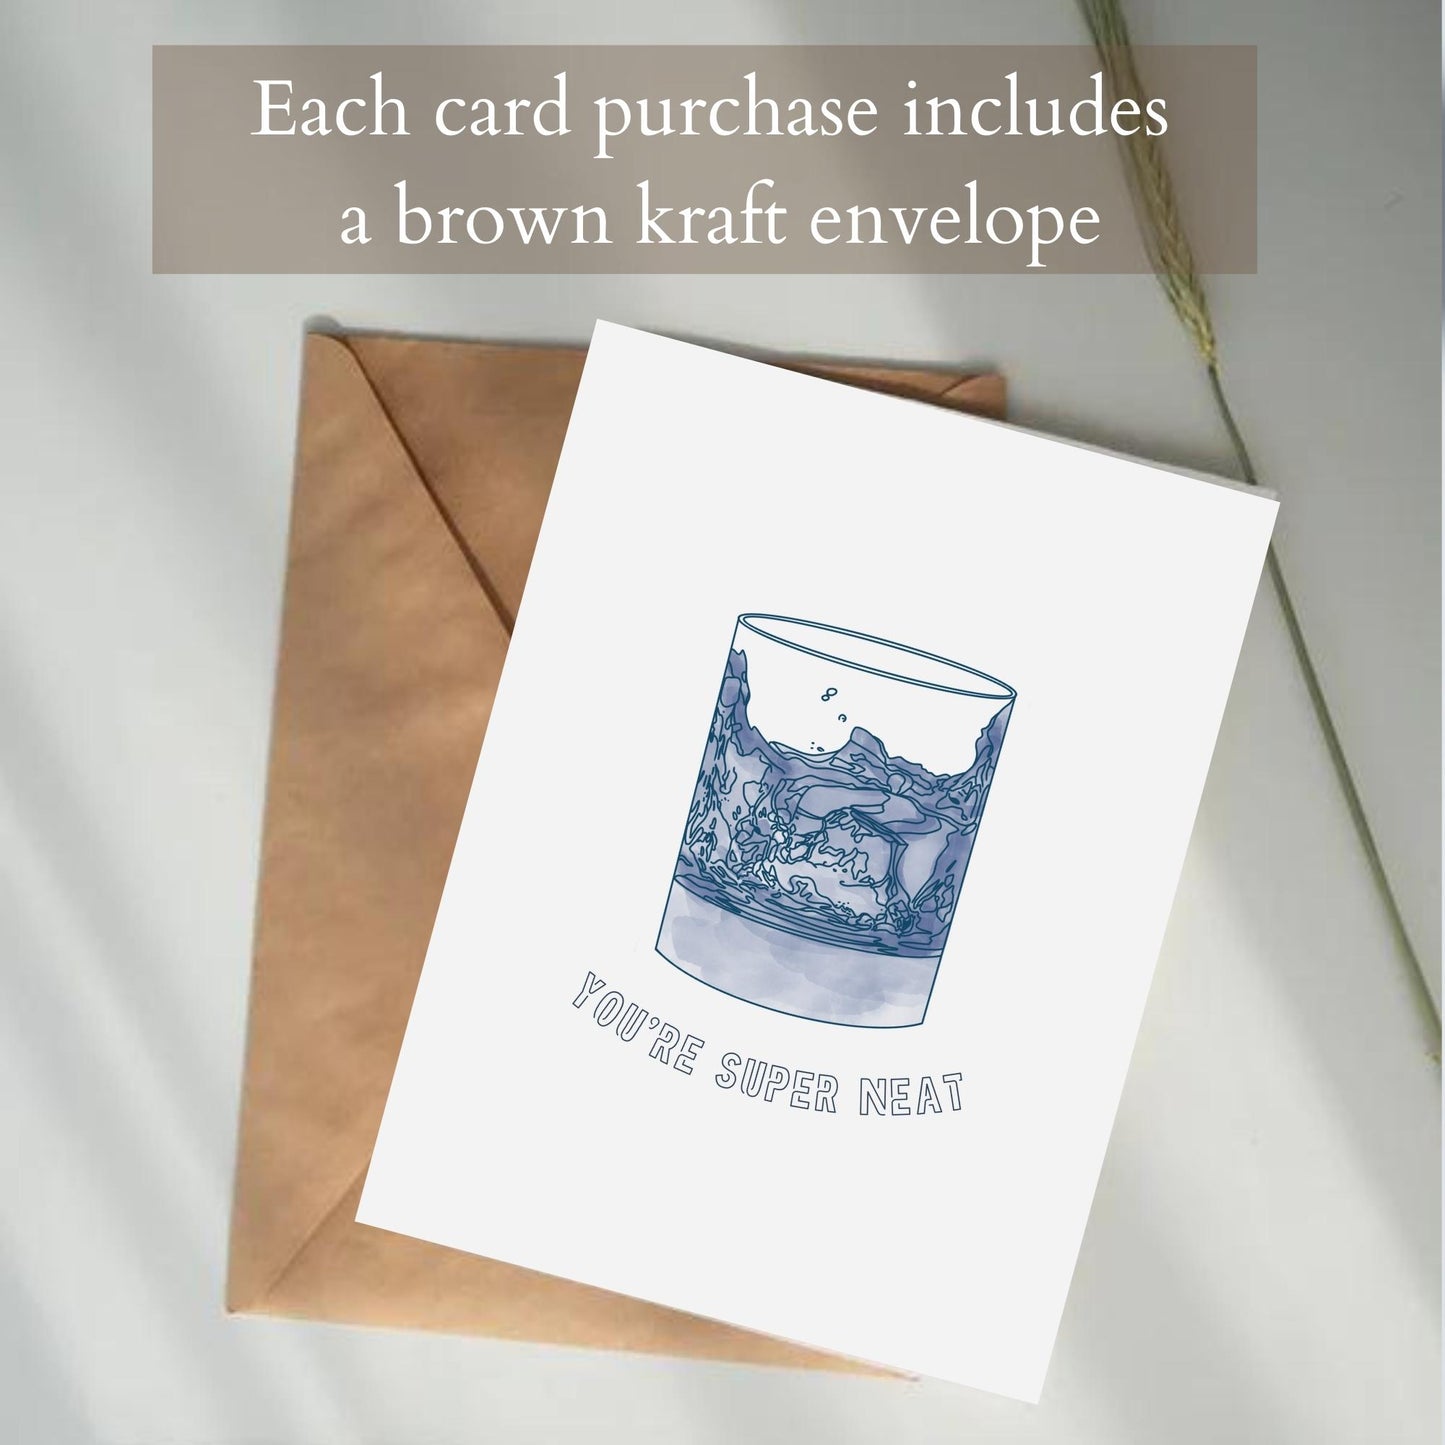 each card comes with a brown kraft envelope